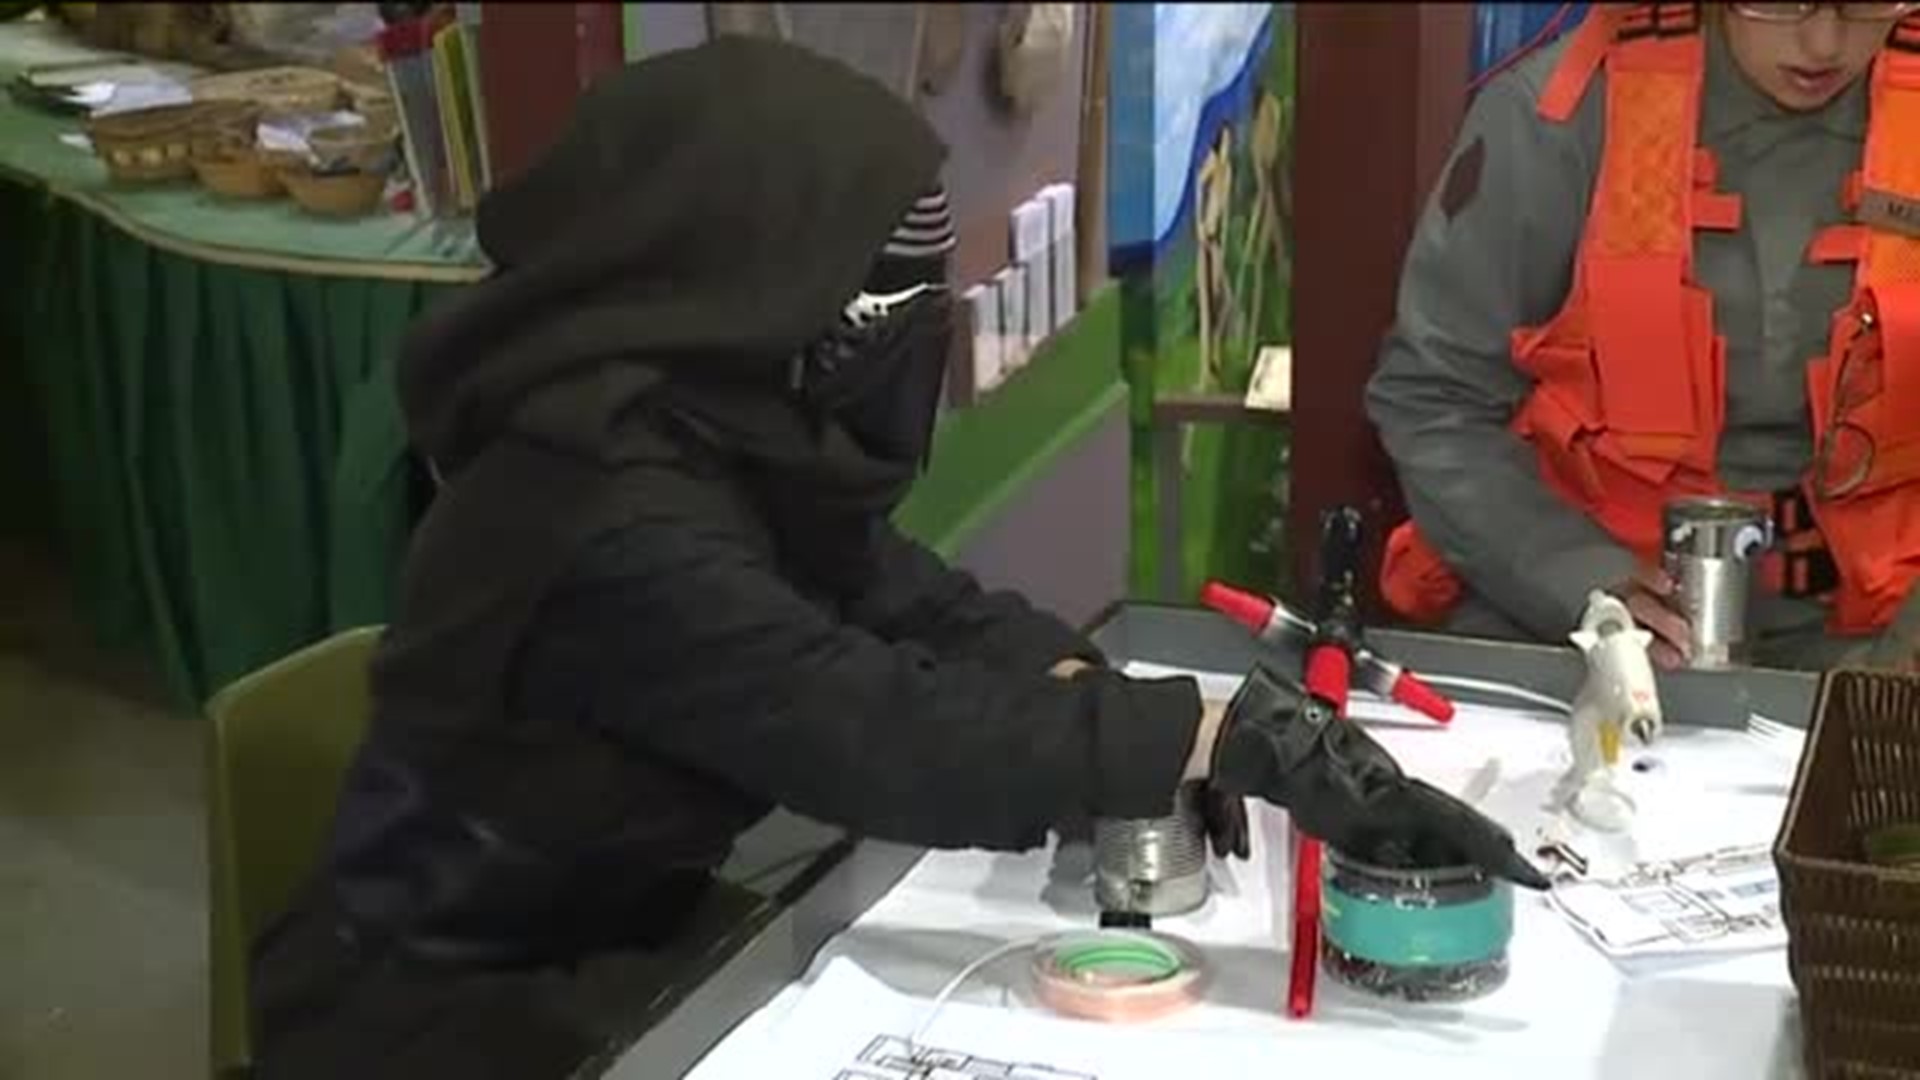 Star Wars Themed Event Helps Children's Museum Thrive